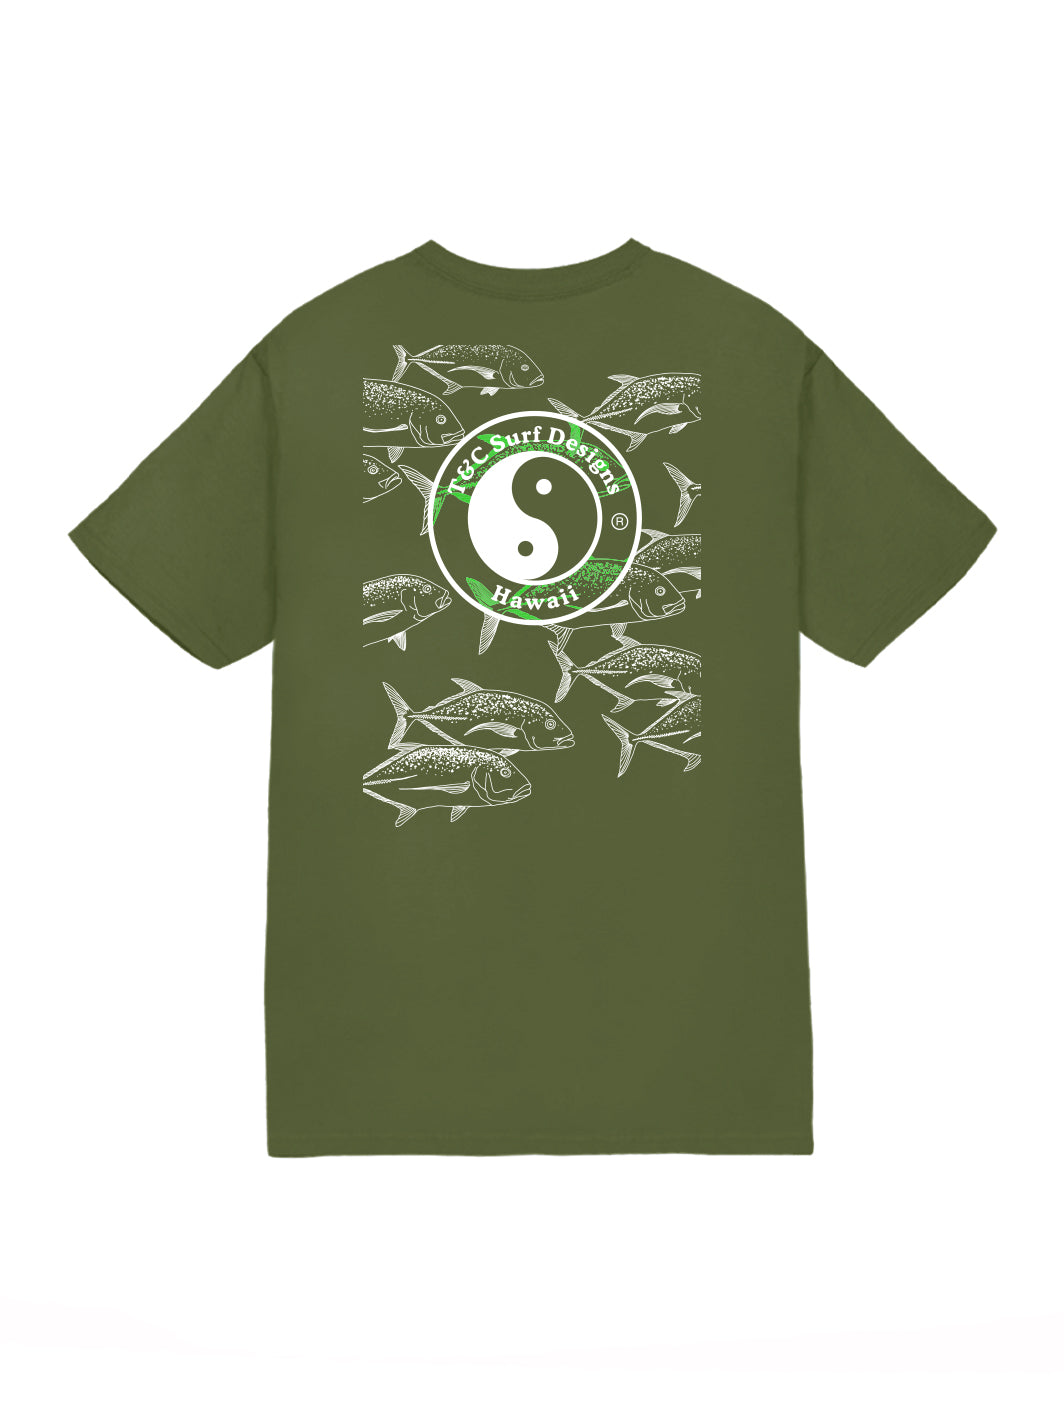 T&C Surf Designs T&C Surf Passing By Jersey Tee, S / Military Green